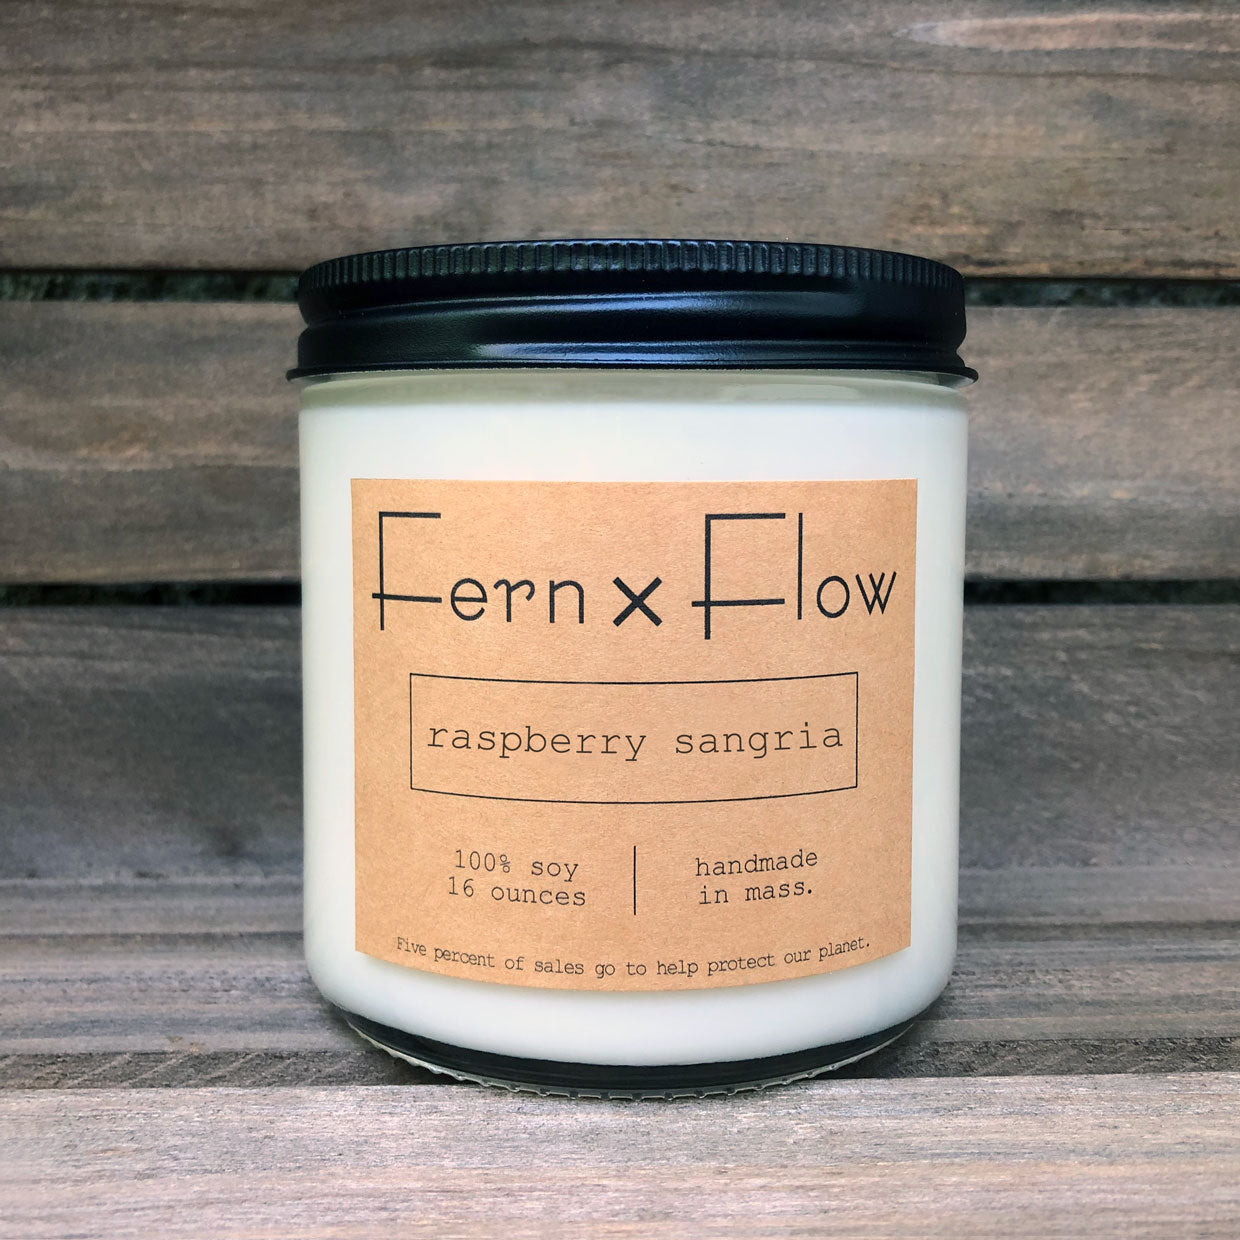 Sixteen-ounce Fern x Flow Raspberry Sangria scented soy candle against a weathered, wooden crate.